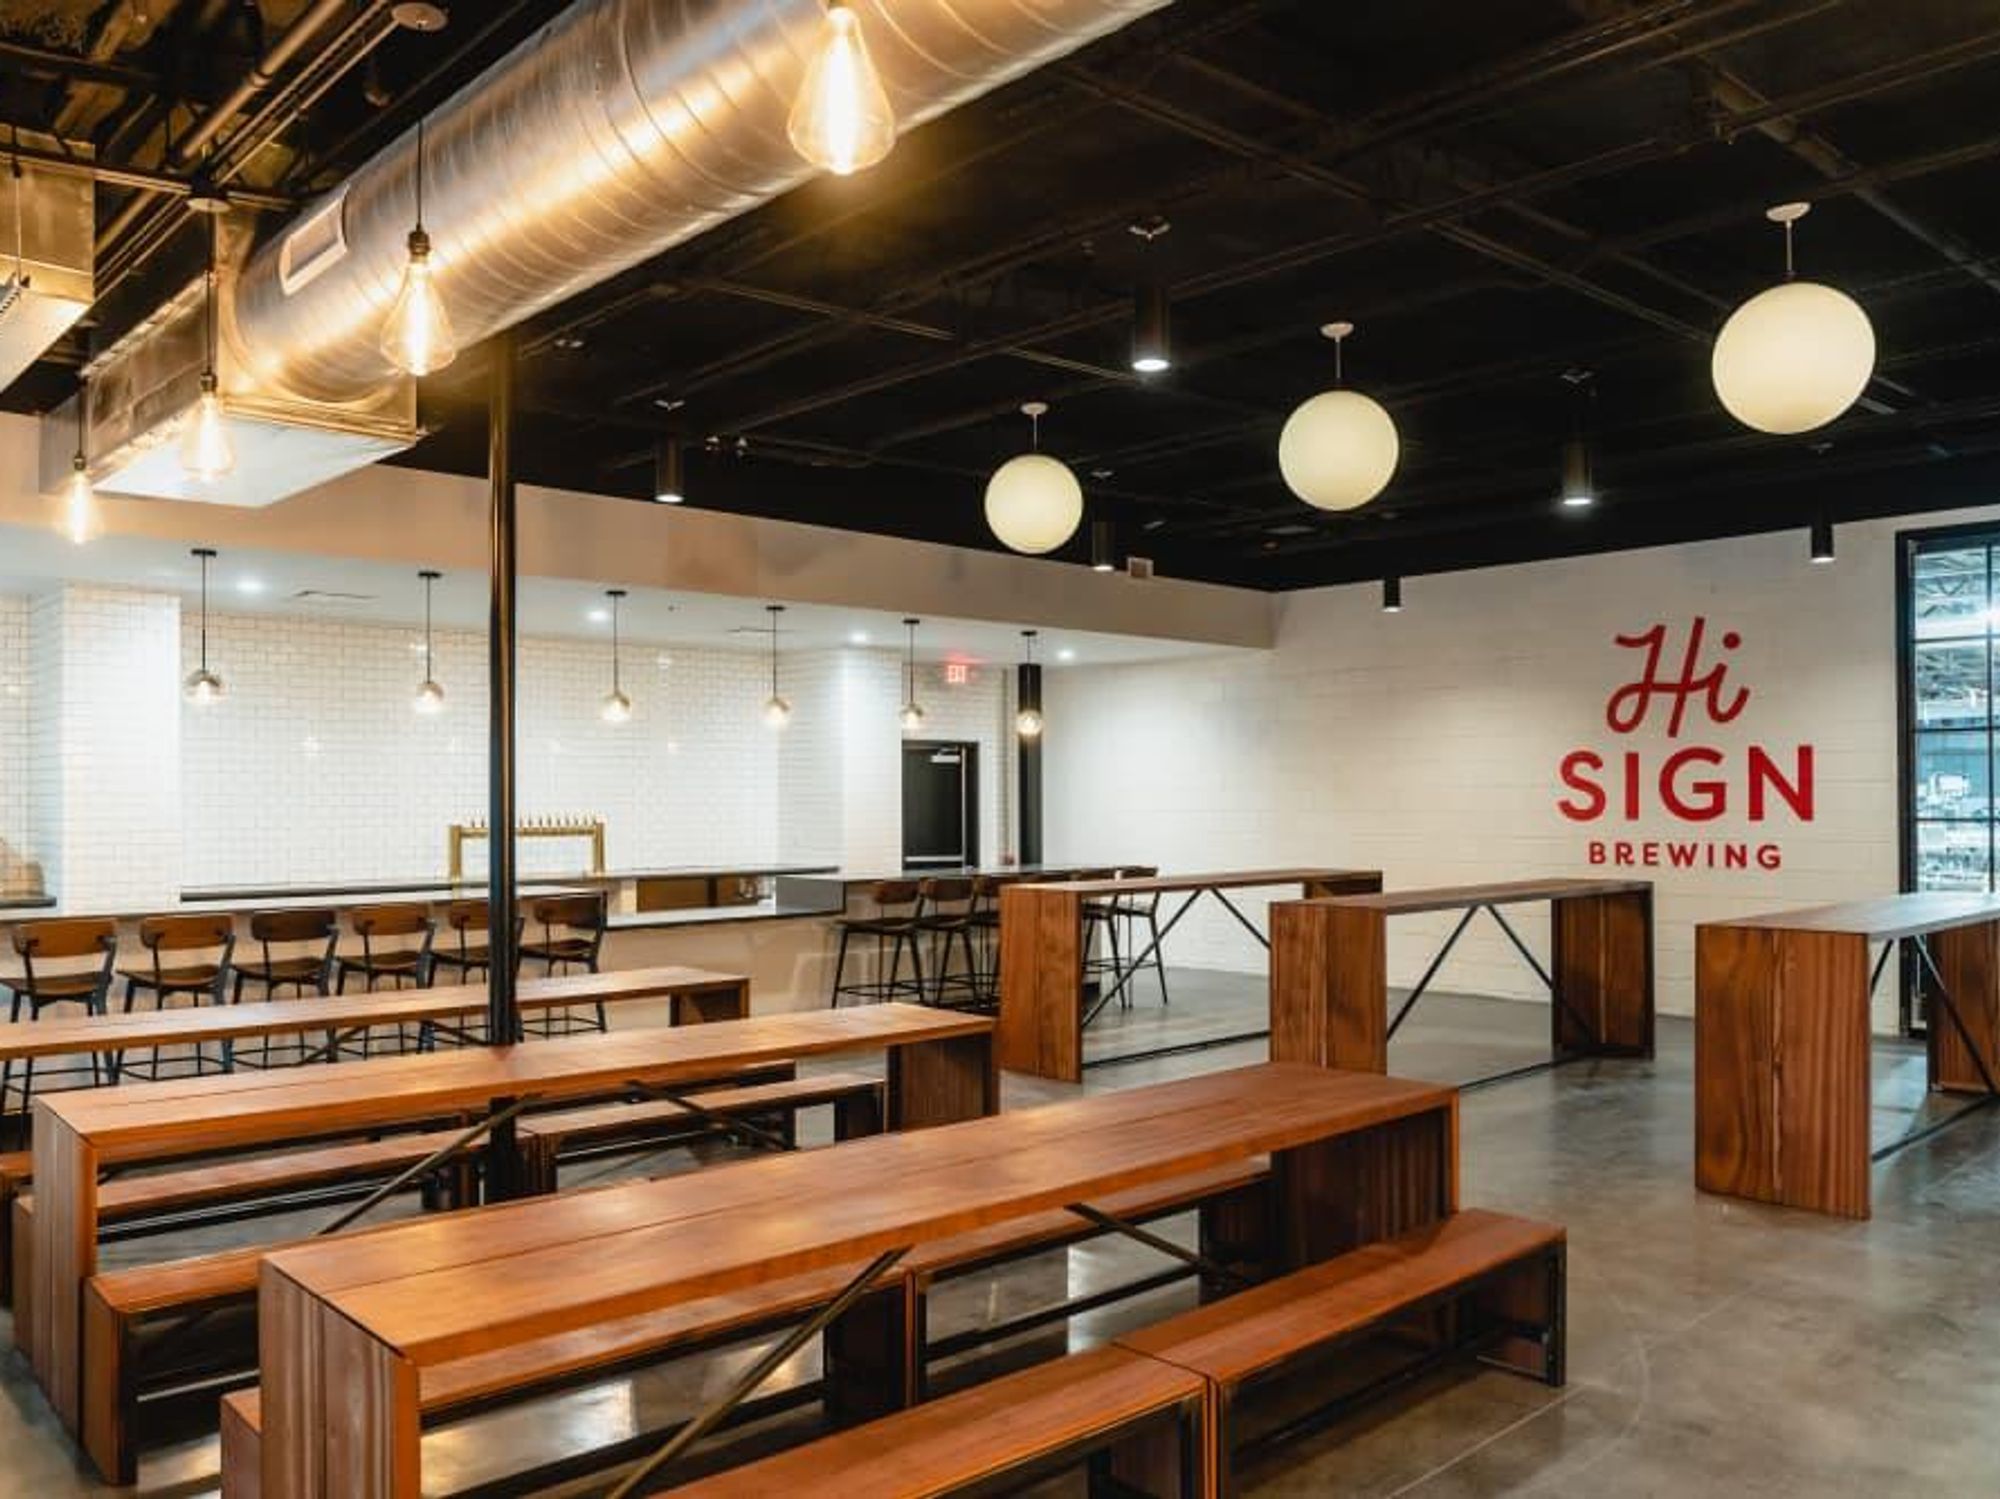 A taproom in natural wood and white, with the new Hi Sign branding on the wall in red.